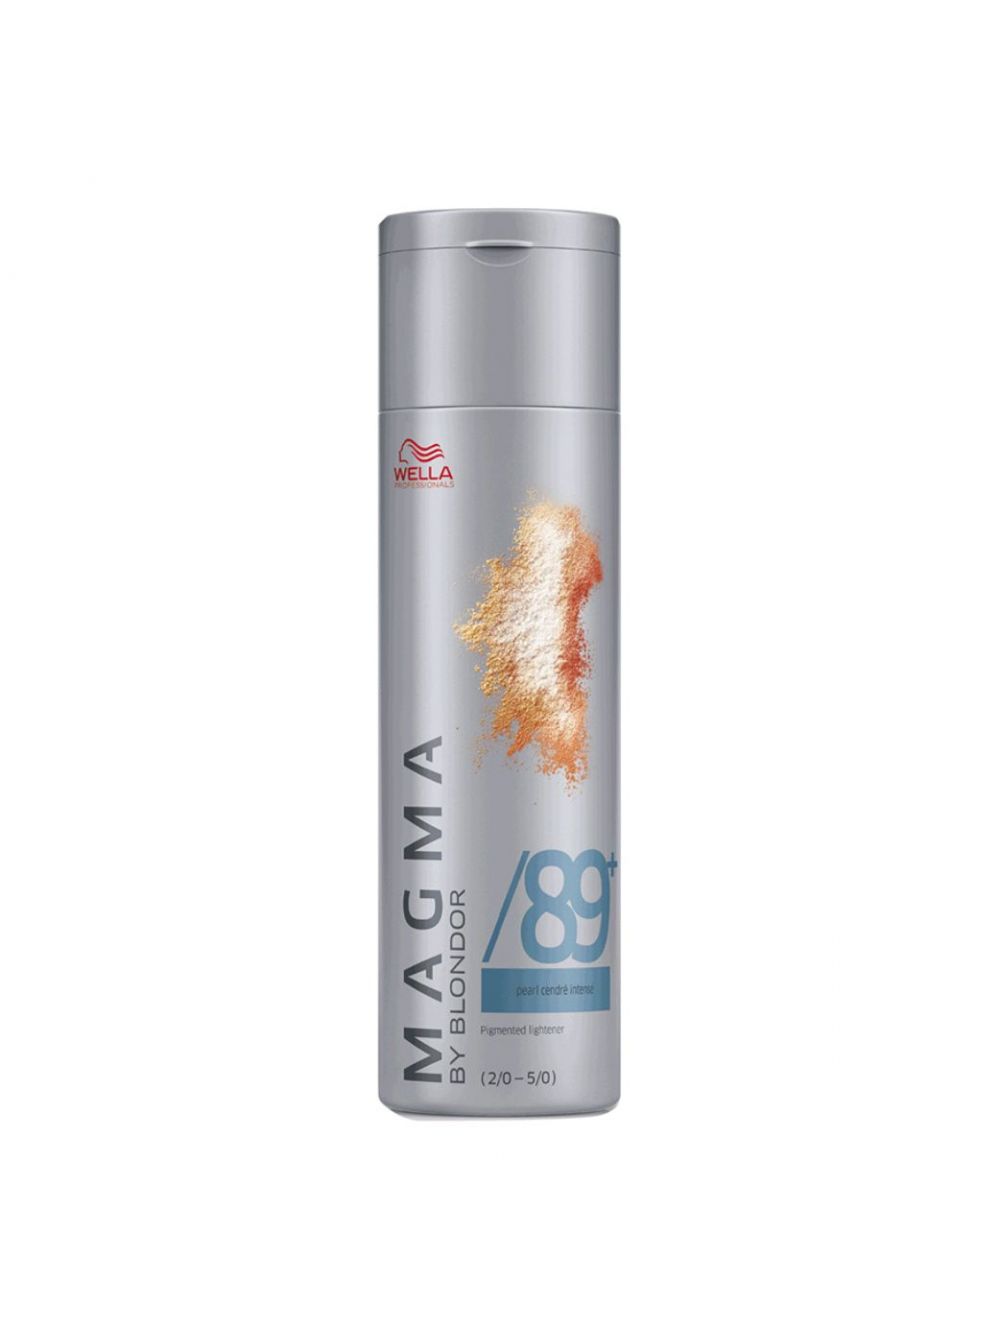 Wella Professionals Magma by Blondor /89+ Pearl Cendre Intense